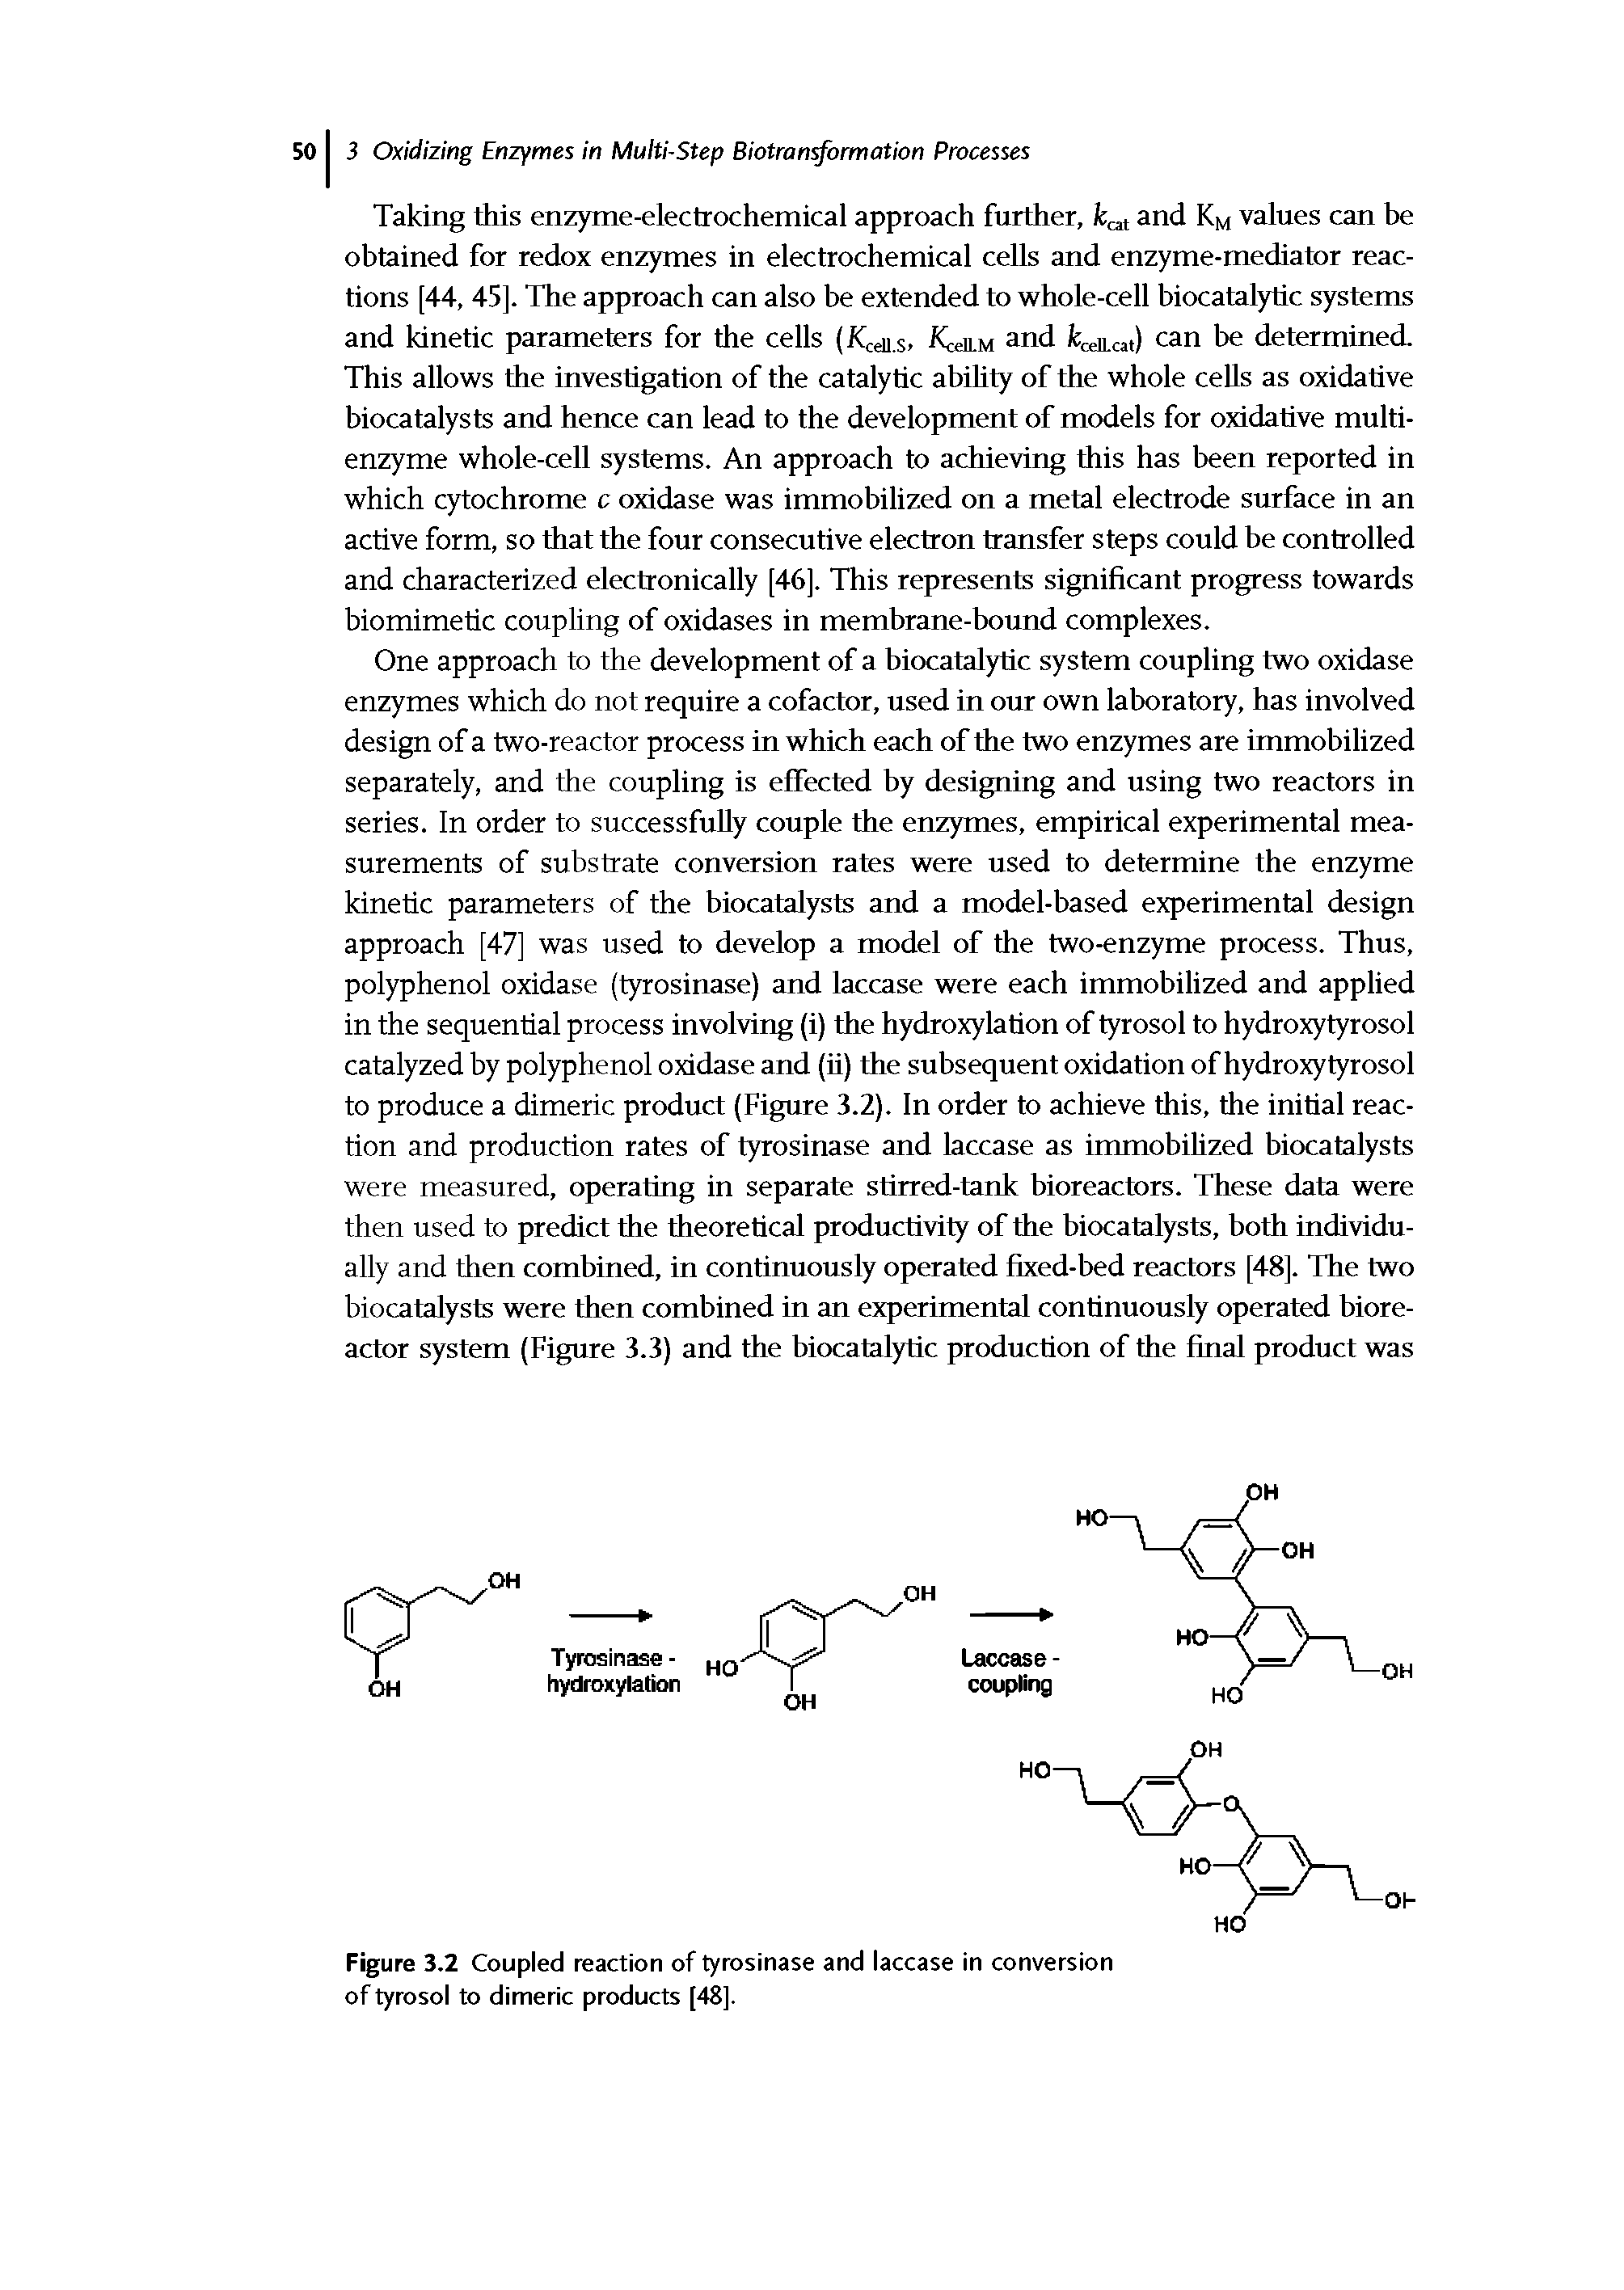 Figure 3.2 Coupled reaction of tyrosinase and laccase in conversion of tyrosol to dimeric products [48].